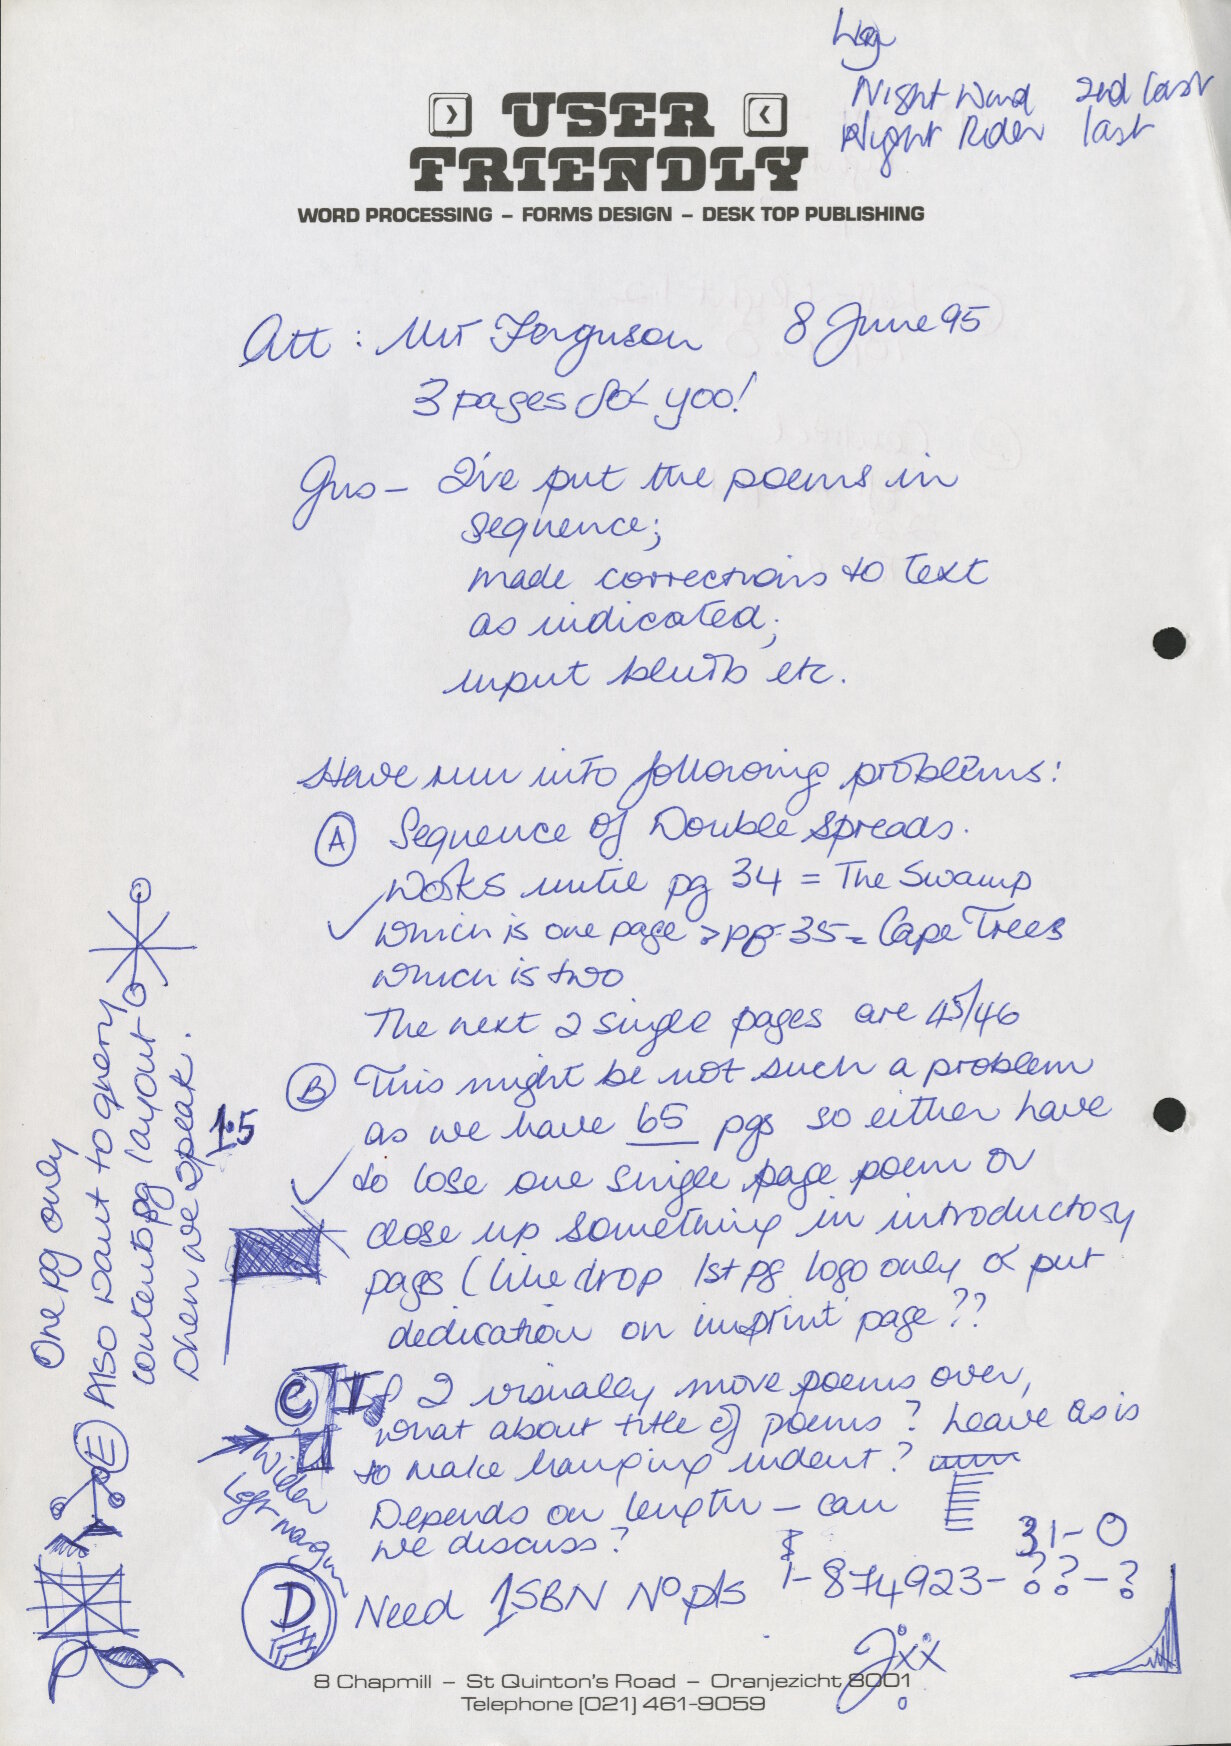 Draft versions of <em>The Lemon Tree </em>was published in 1995 by Snailpress. The editor, Gus Ferguson, colour codes his comments.